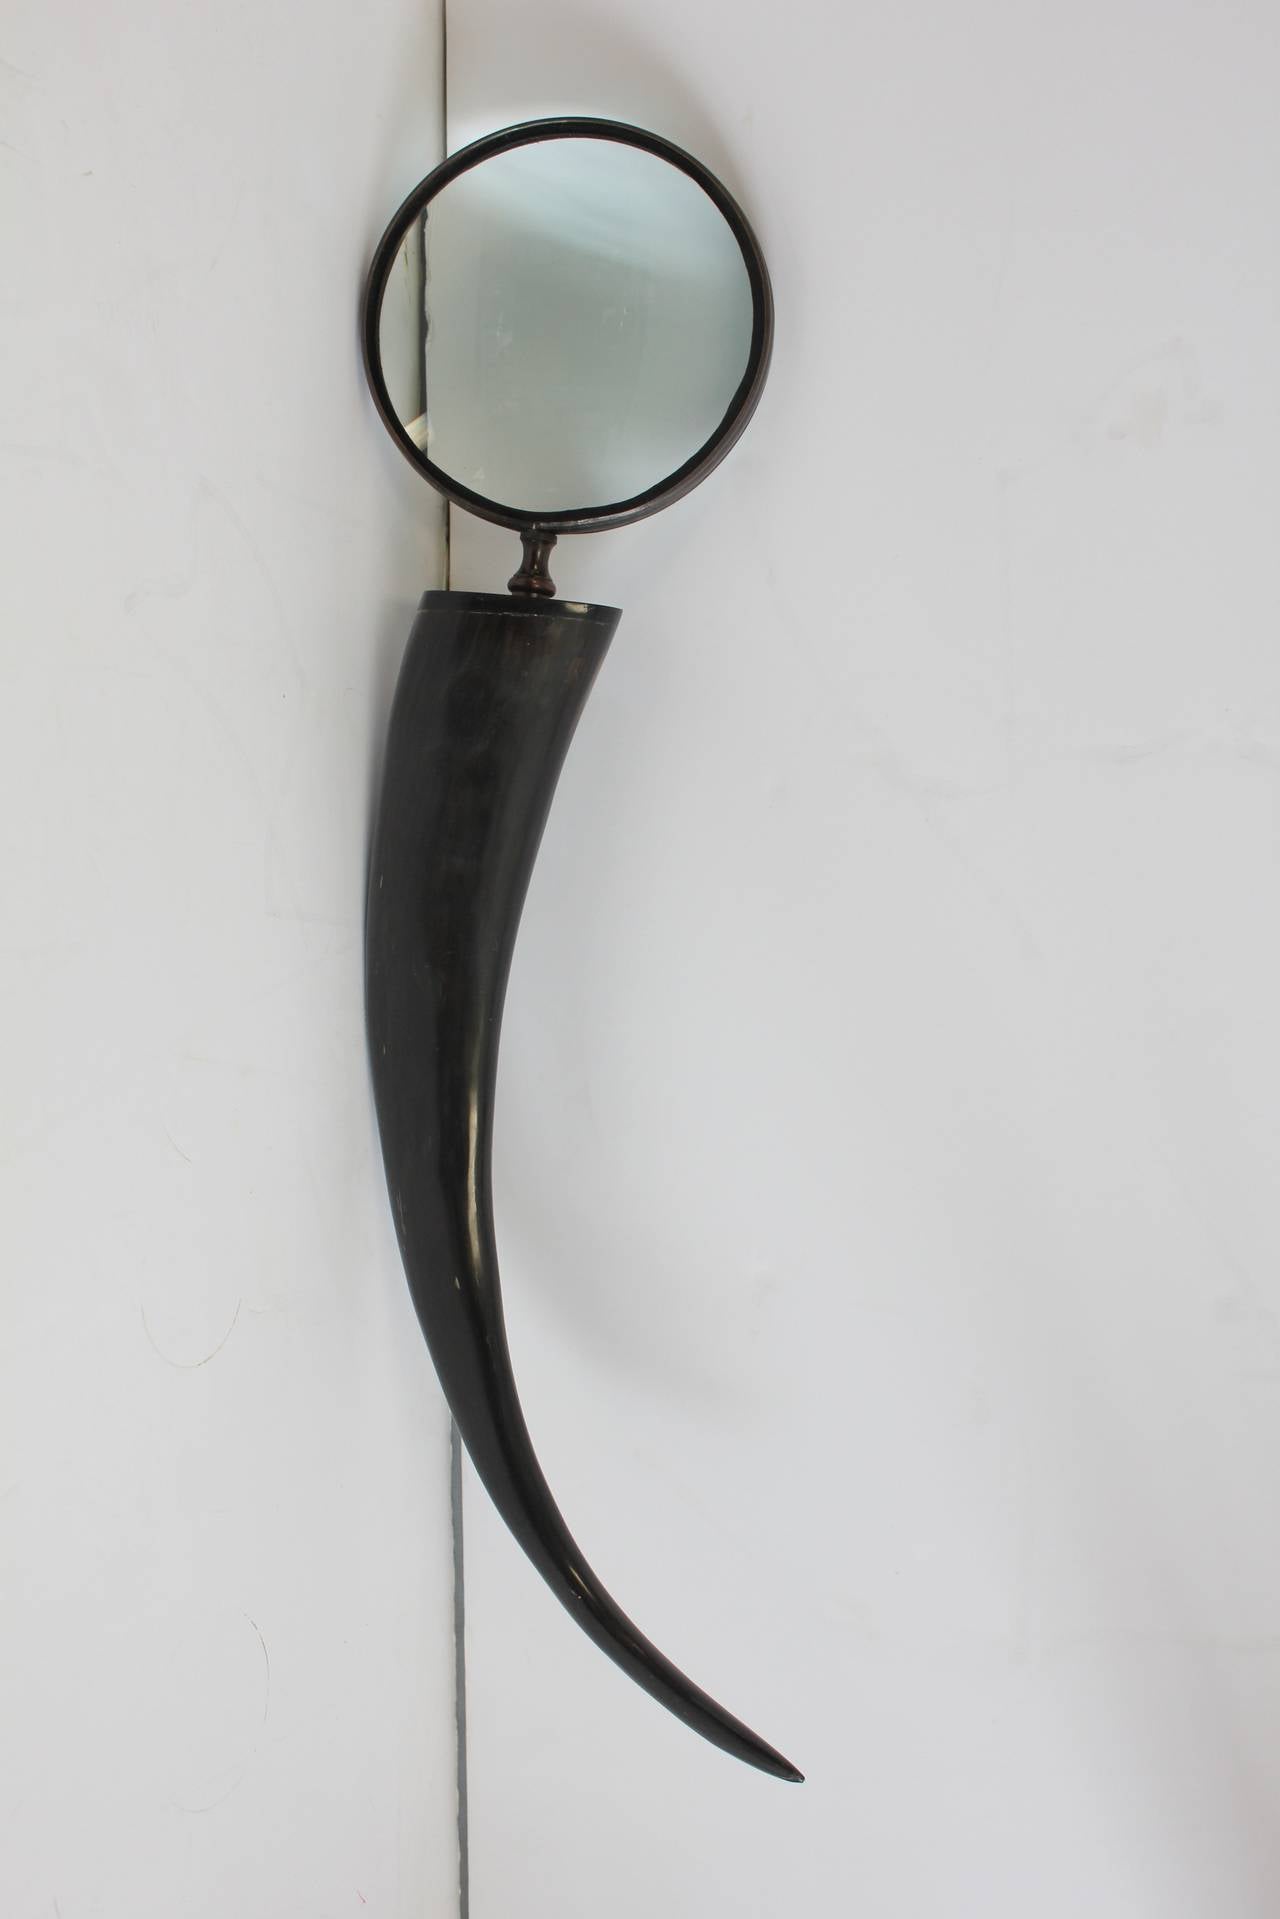 Large antique bronze & horn magnifying glass.